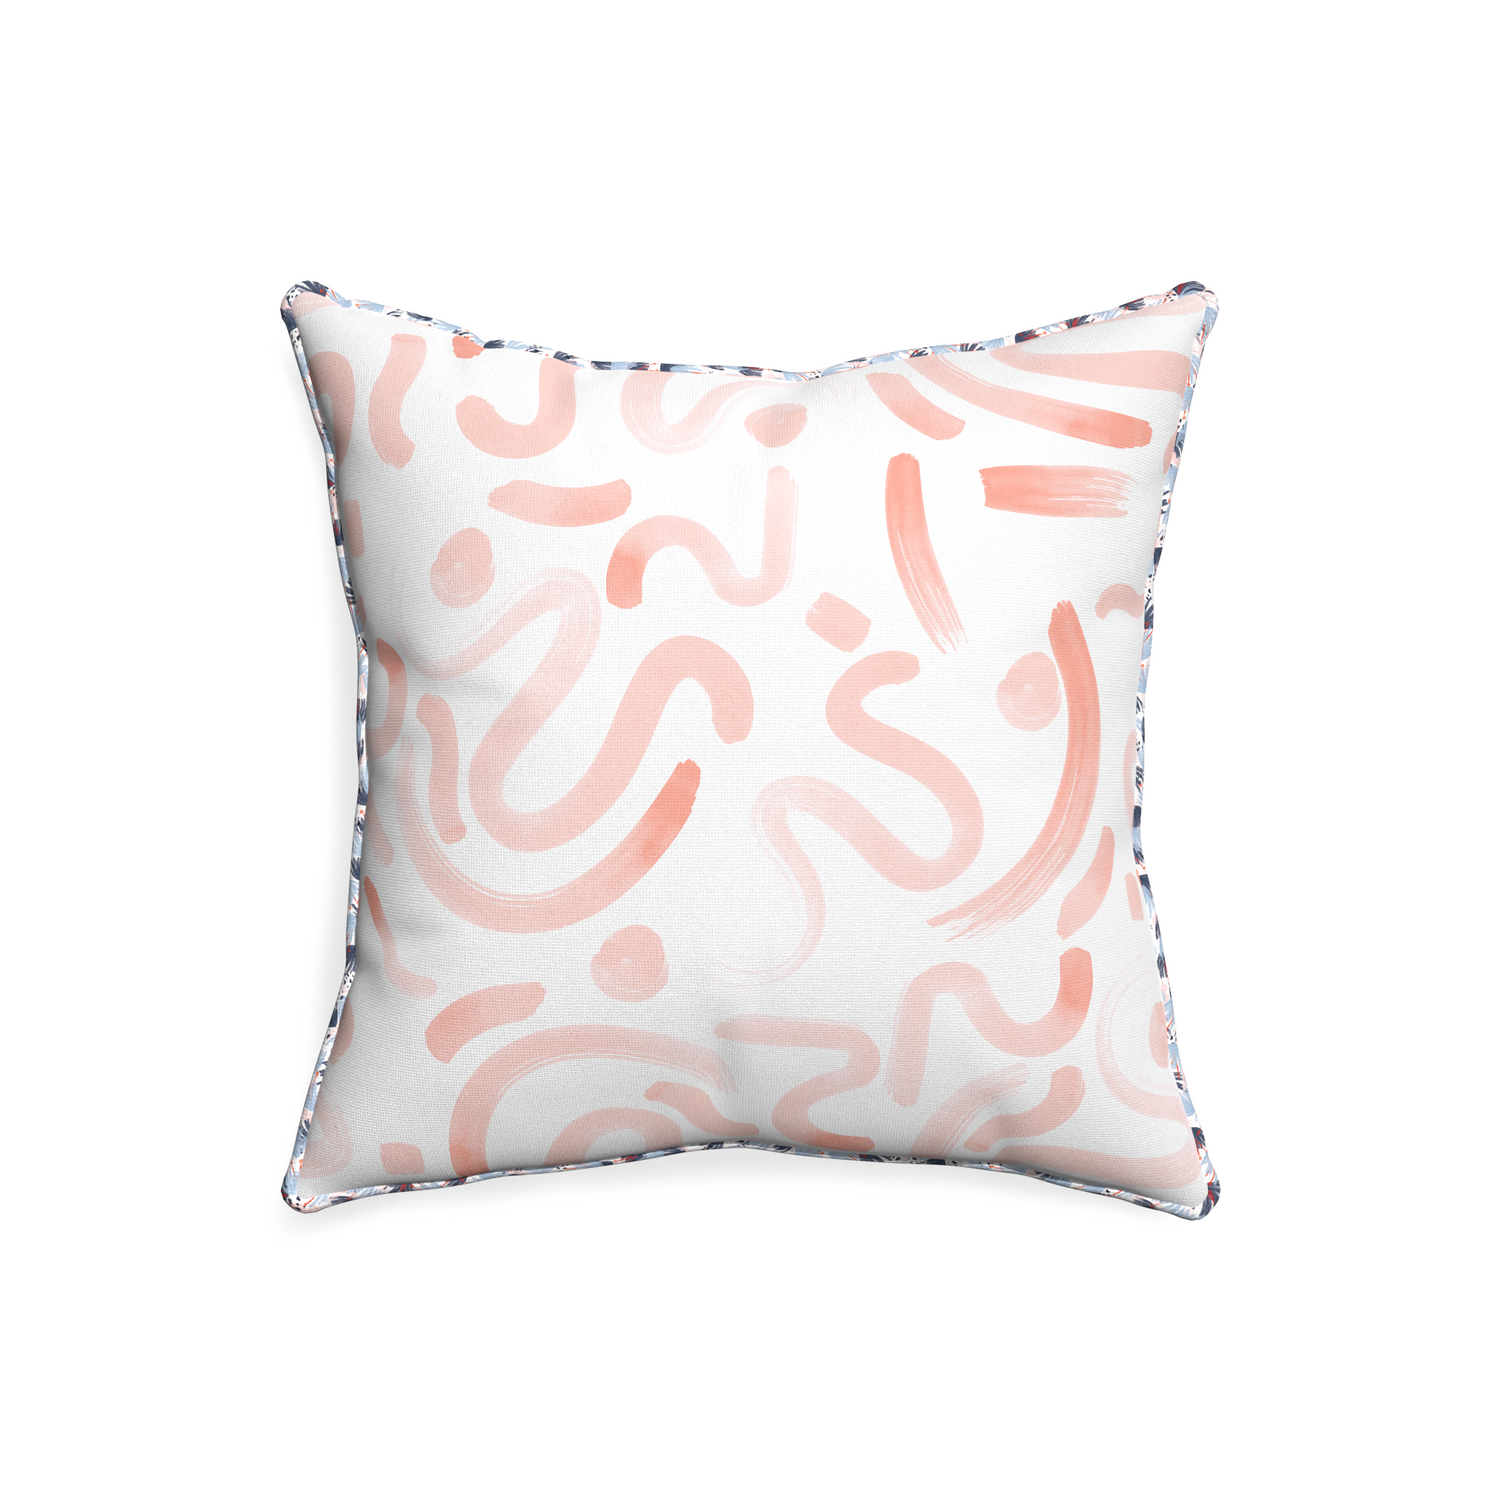 20-square hockney pink custom pillow with e piping on white background